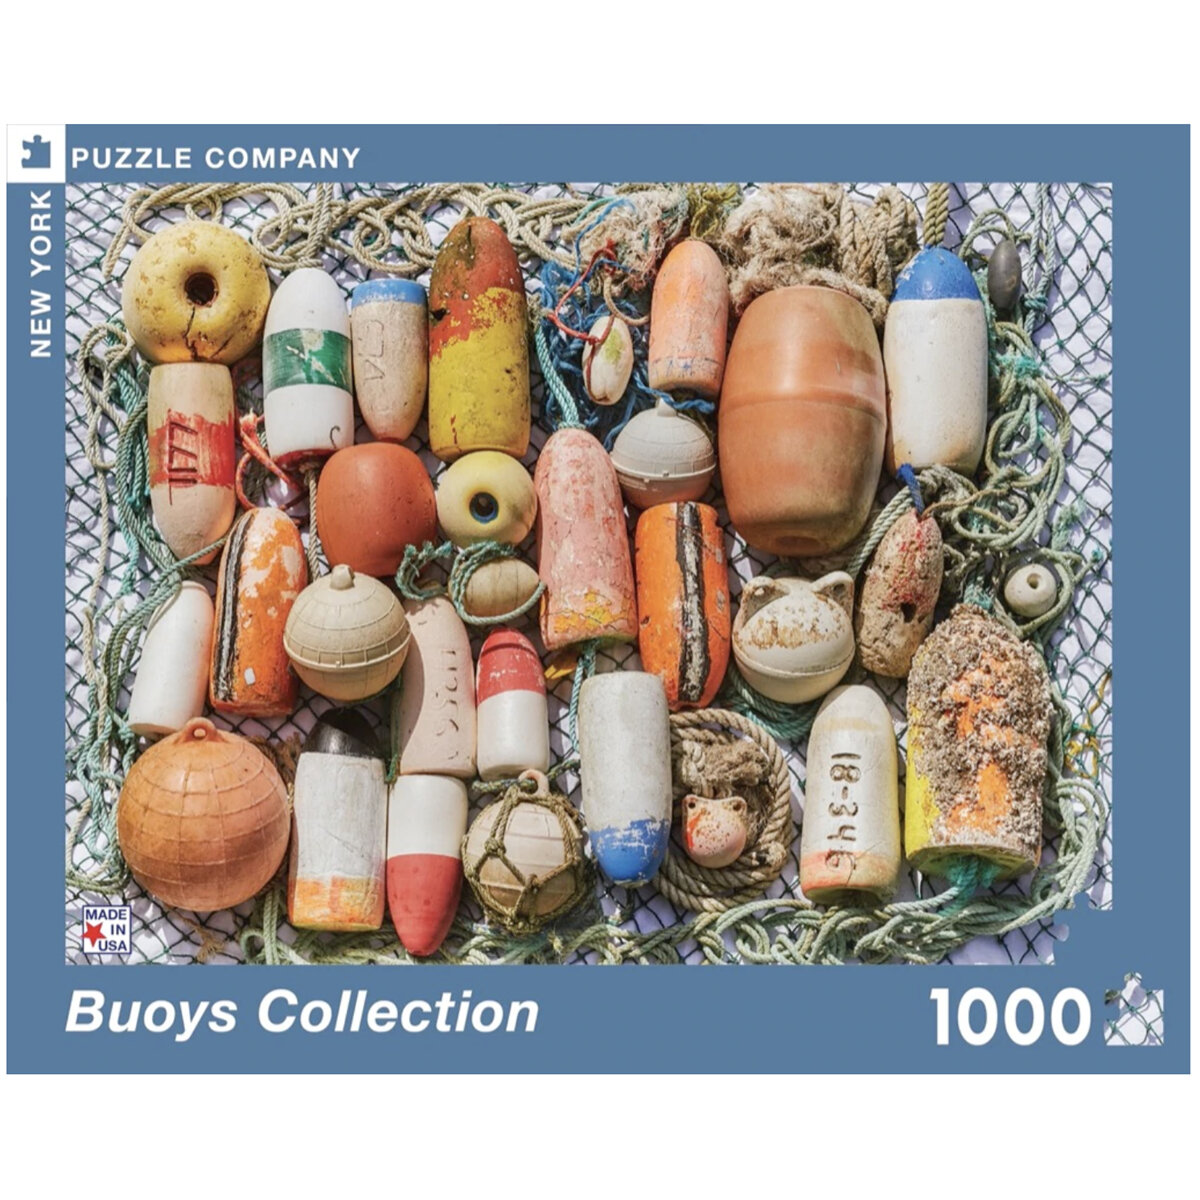 Buoys Collection 1000 Piece Puzzle - New York Puzzle Company